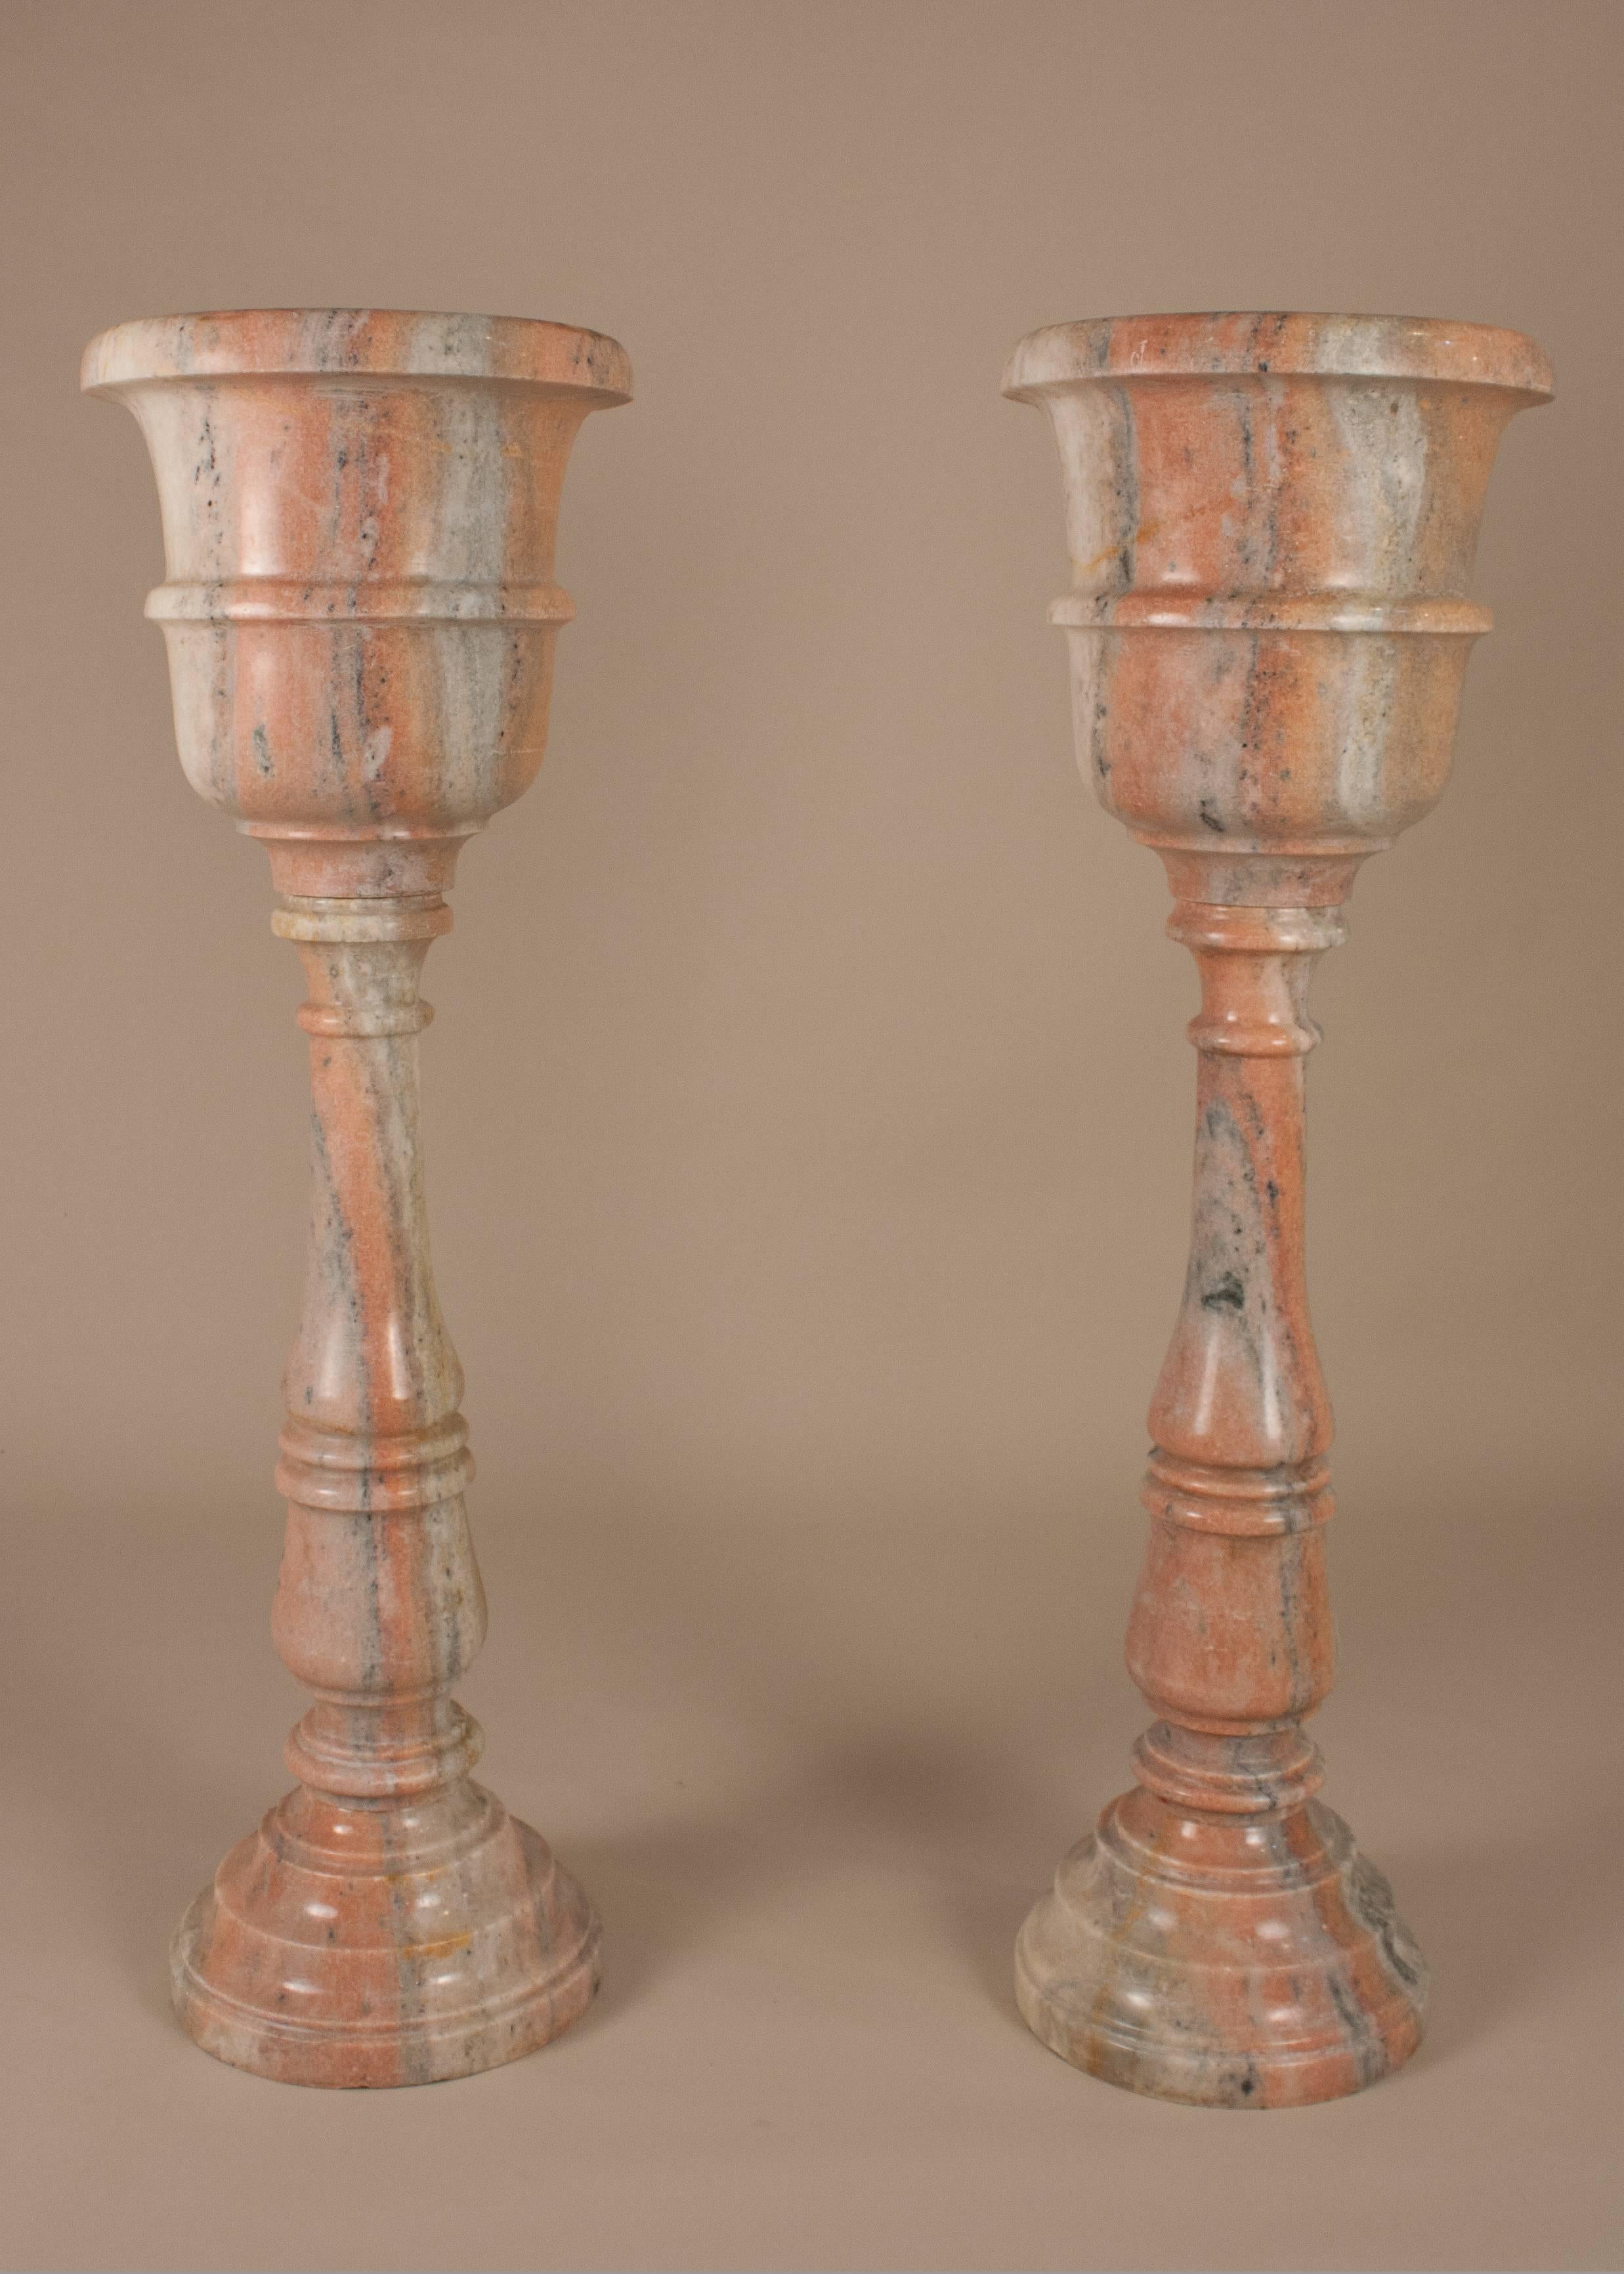 Pair of Udaipur pink marble standing jardinieres, each comprised of three pieces. These Mid-Century planters have beautiful grain, with a palette of salmon pink and gray tones.